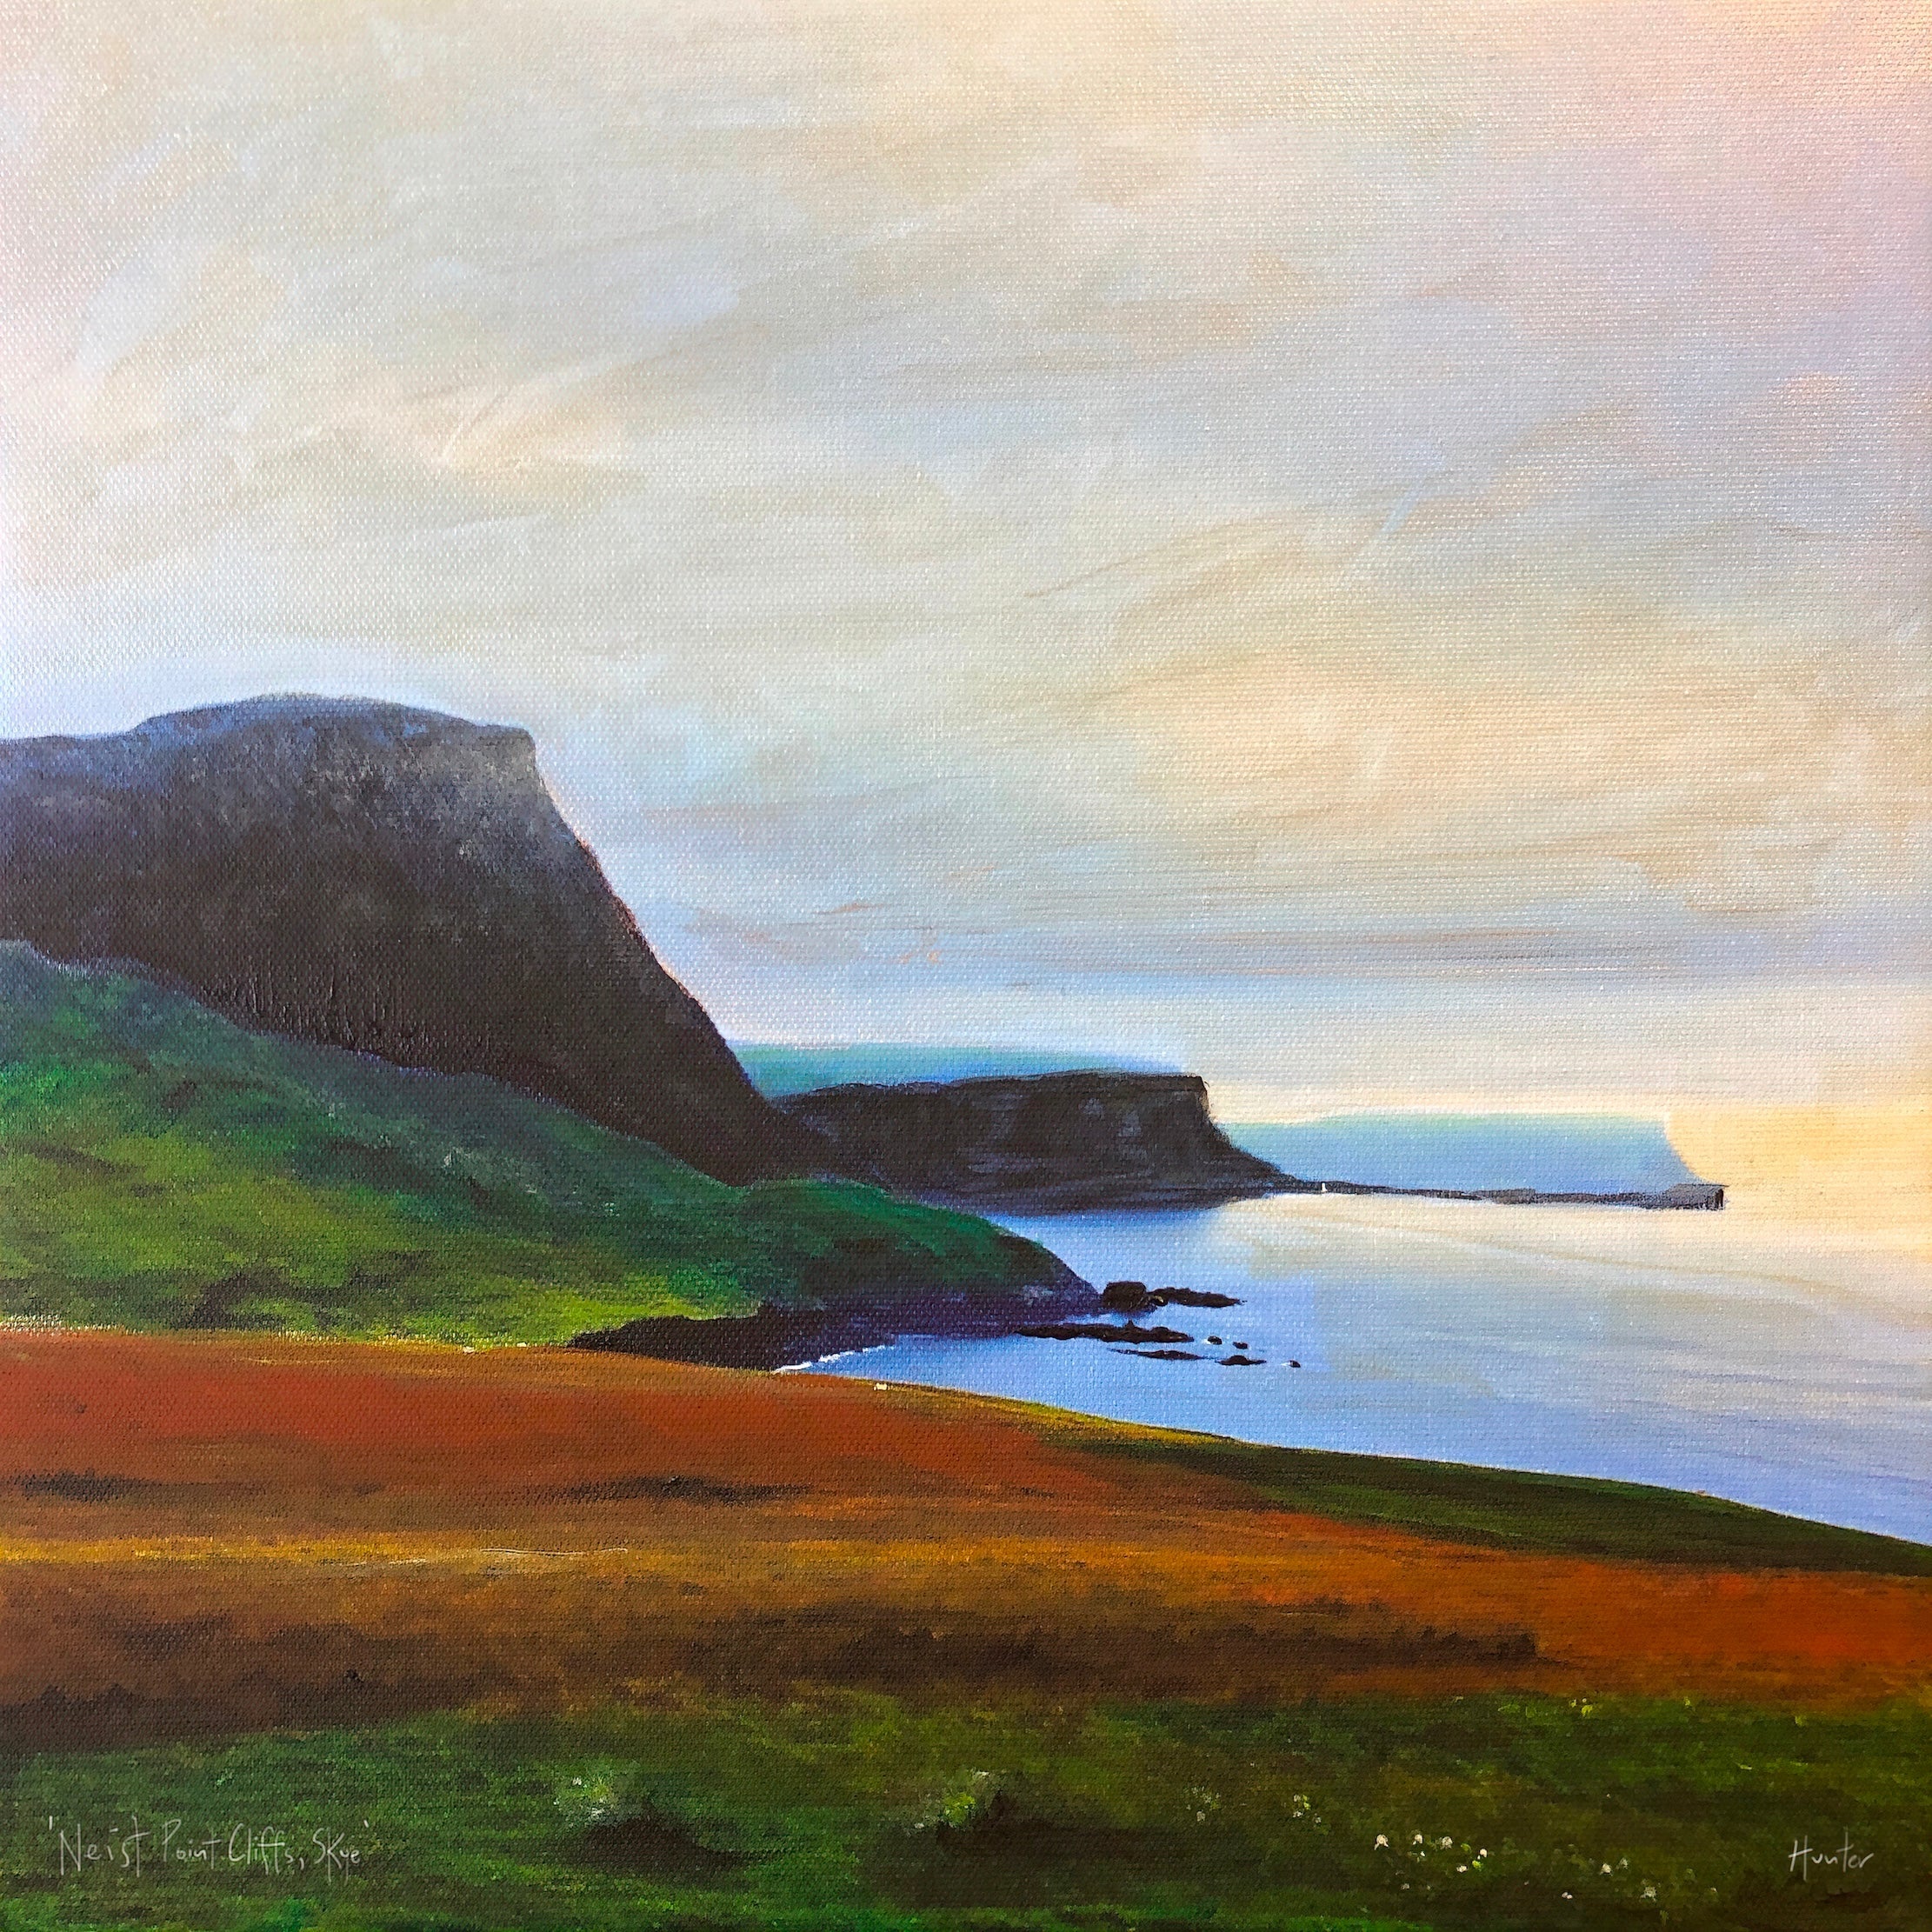 Neist Point Cliffs Skye | Scotland In Your Pocket Art Print-Scotland In Your Pocket Framed Prints-Skye Art Gallery-Paintings, Prints, Homeware, Art Gifts From Scotland By Scottish Artist Kevin Hunter